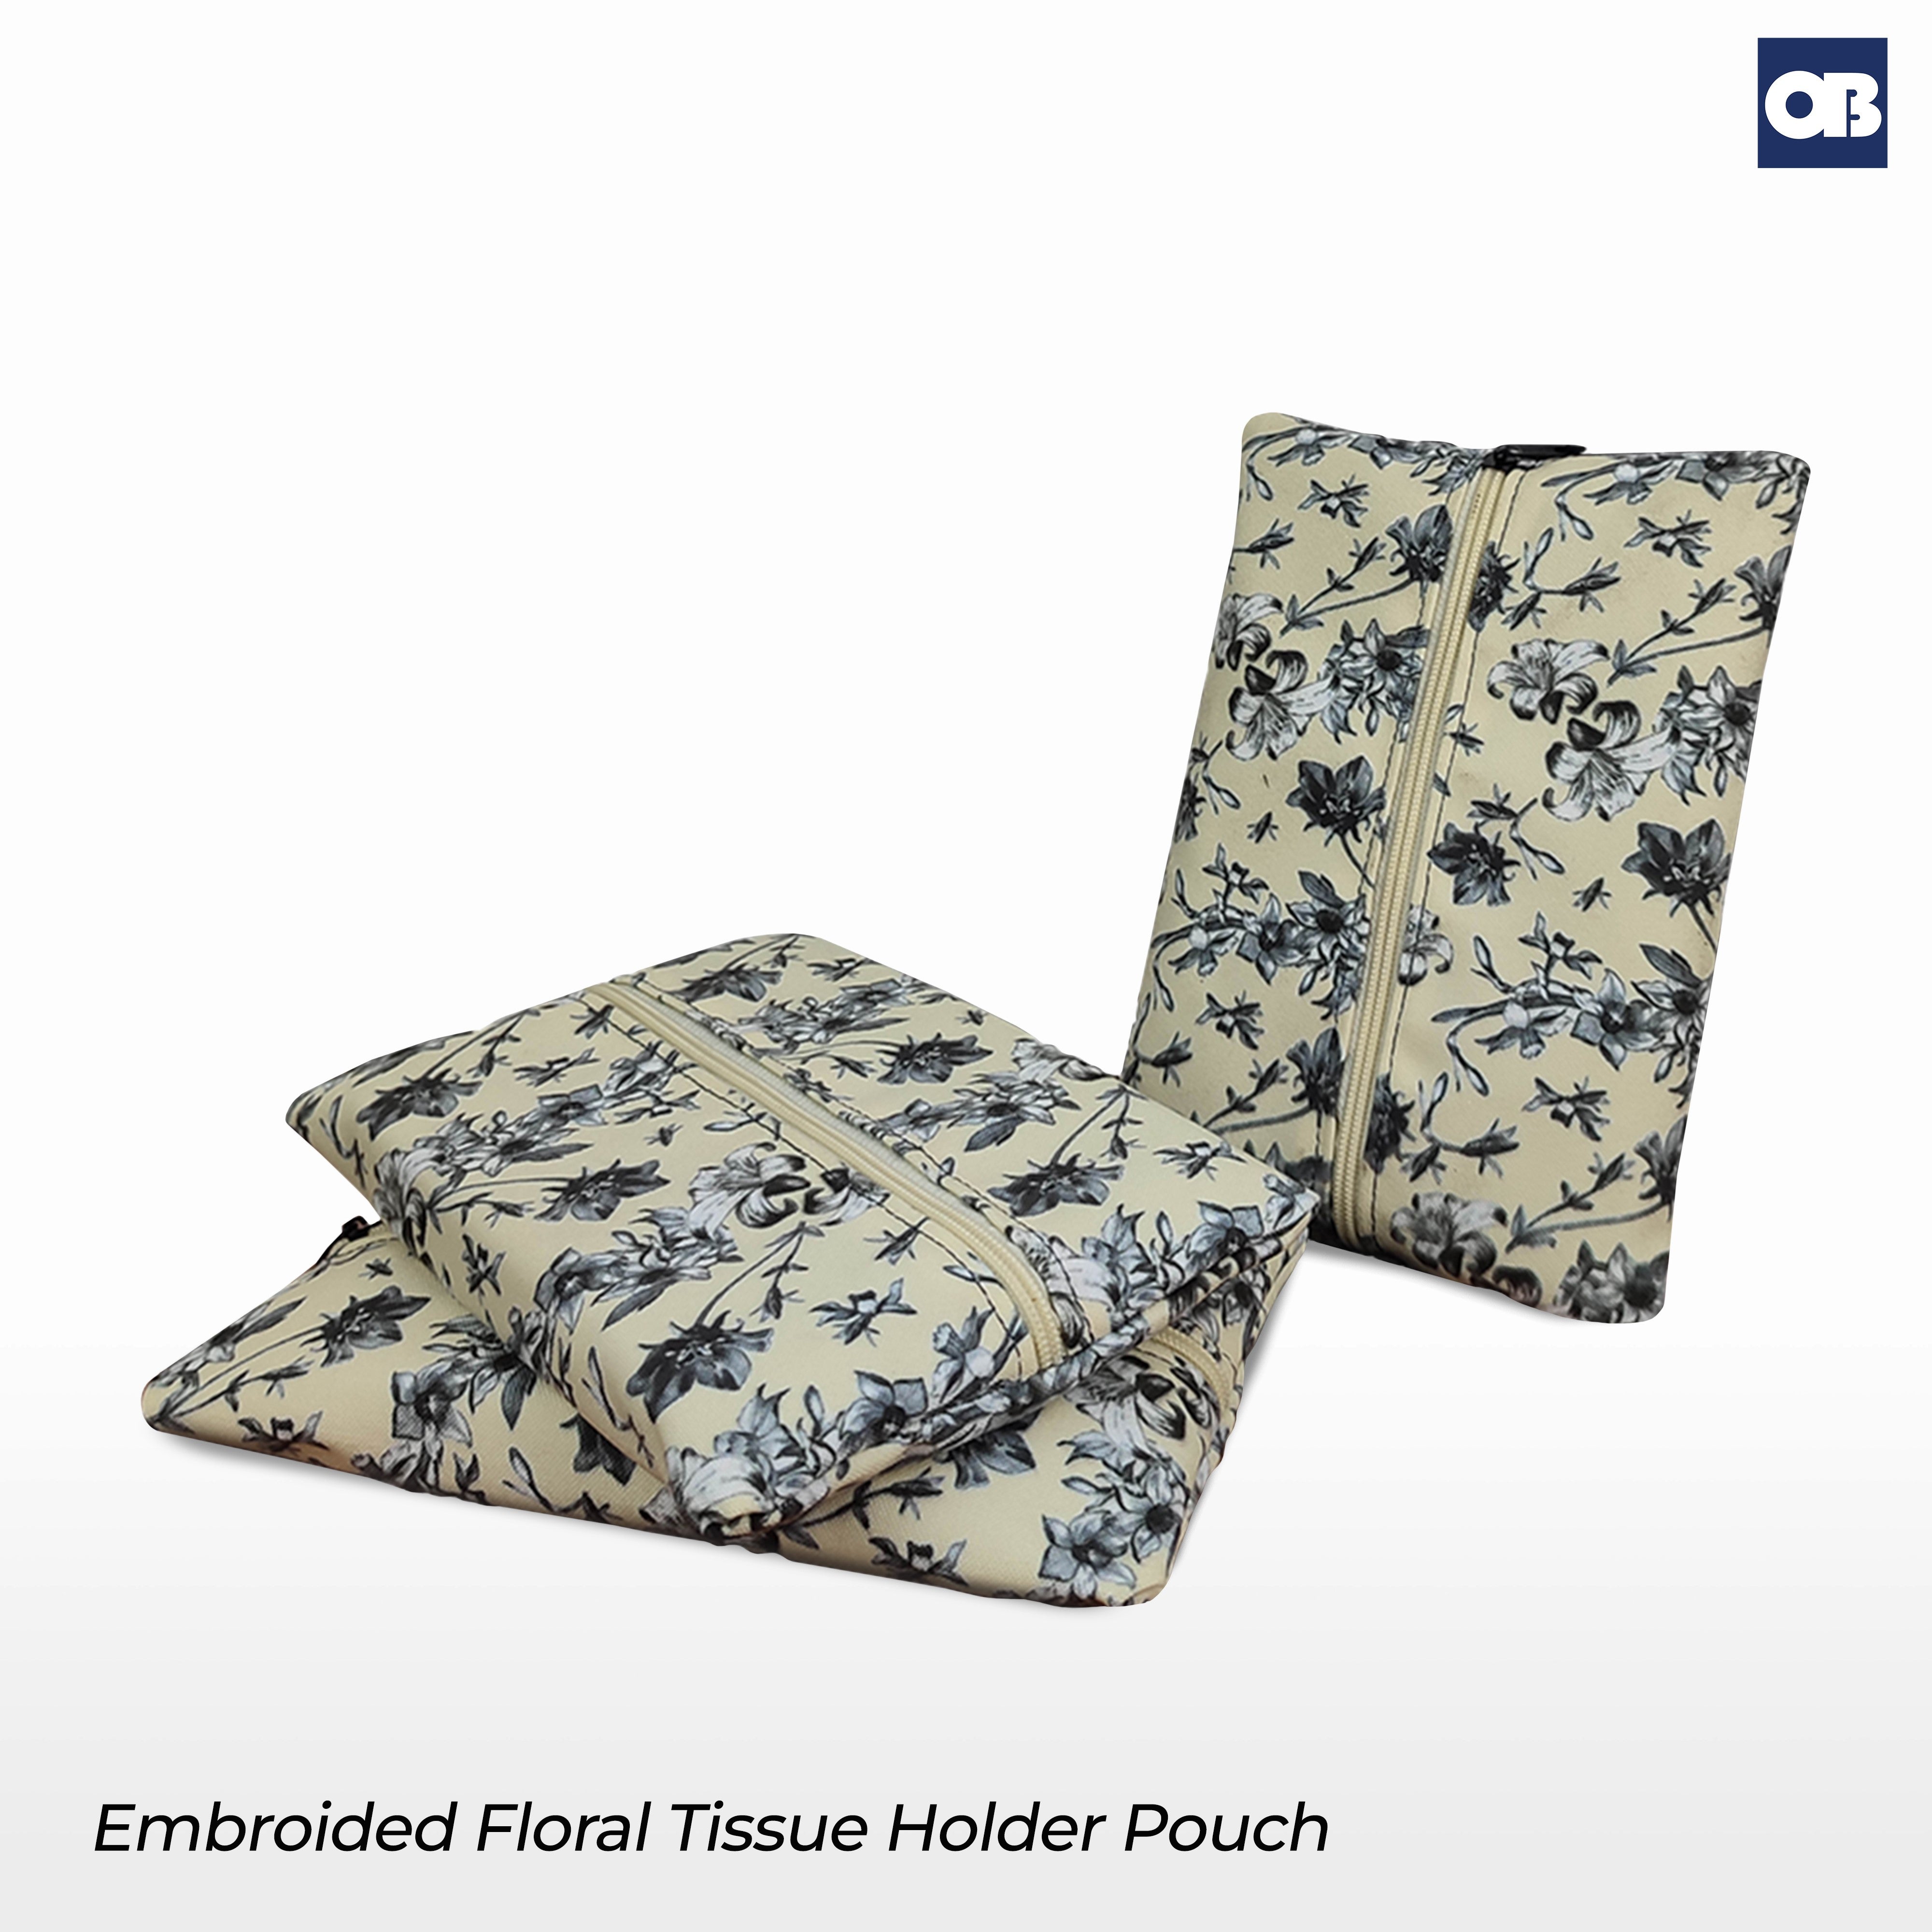 OB Embroider Floral Tissue Holder Pouch